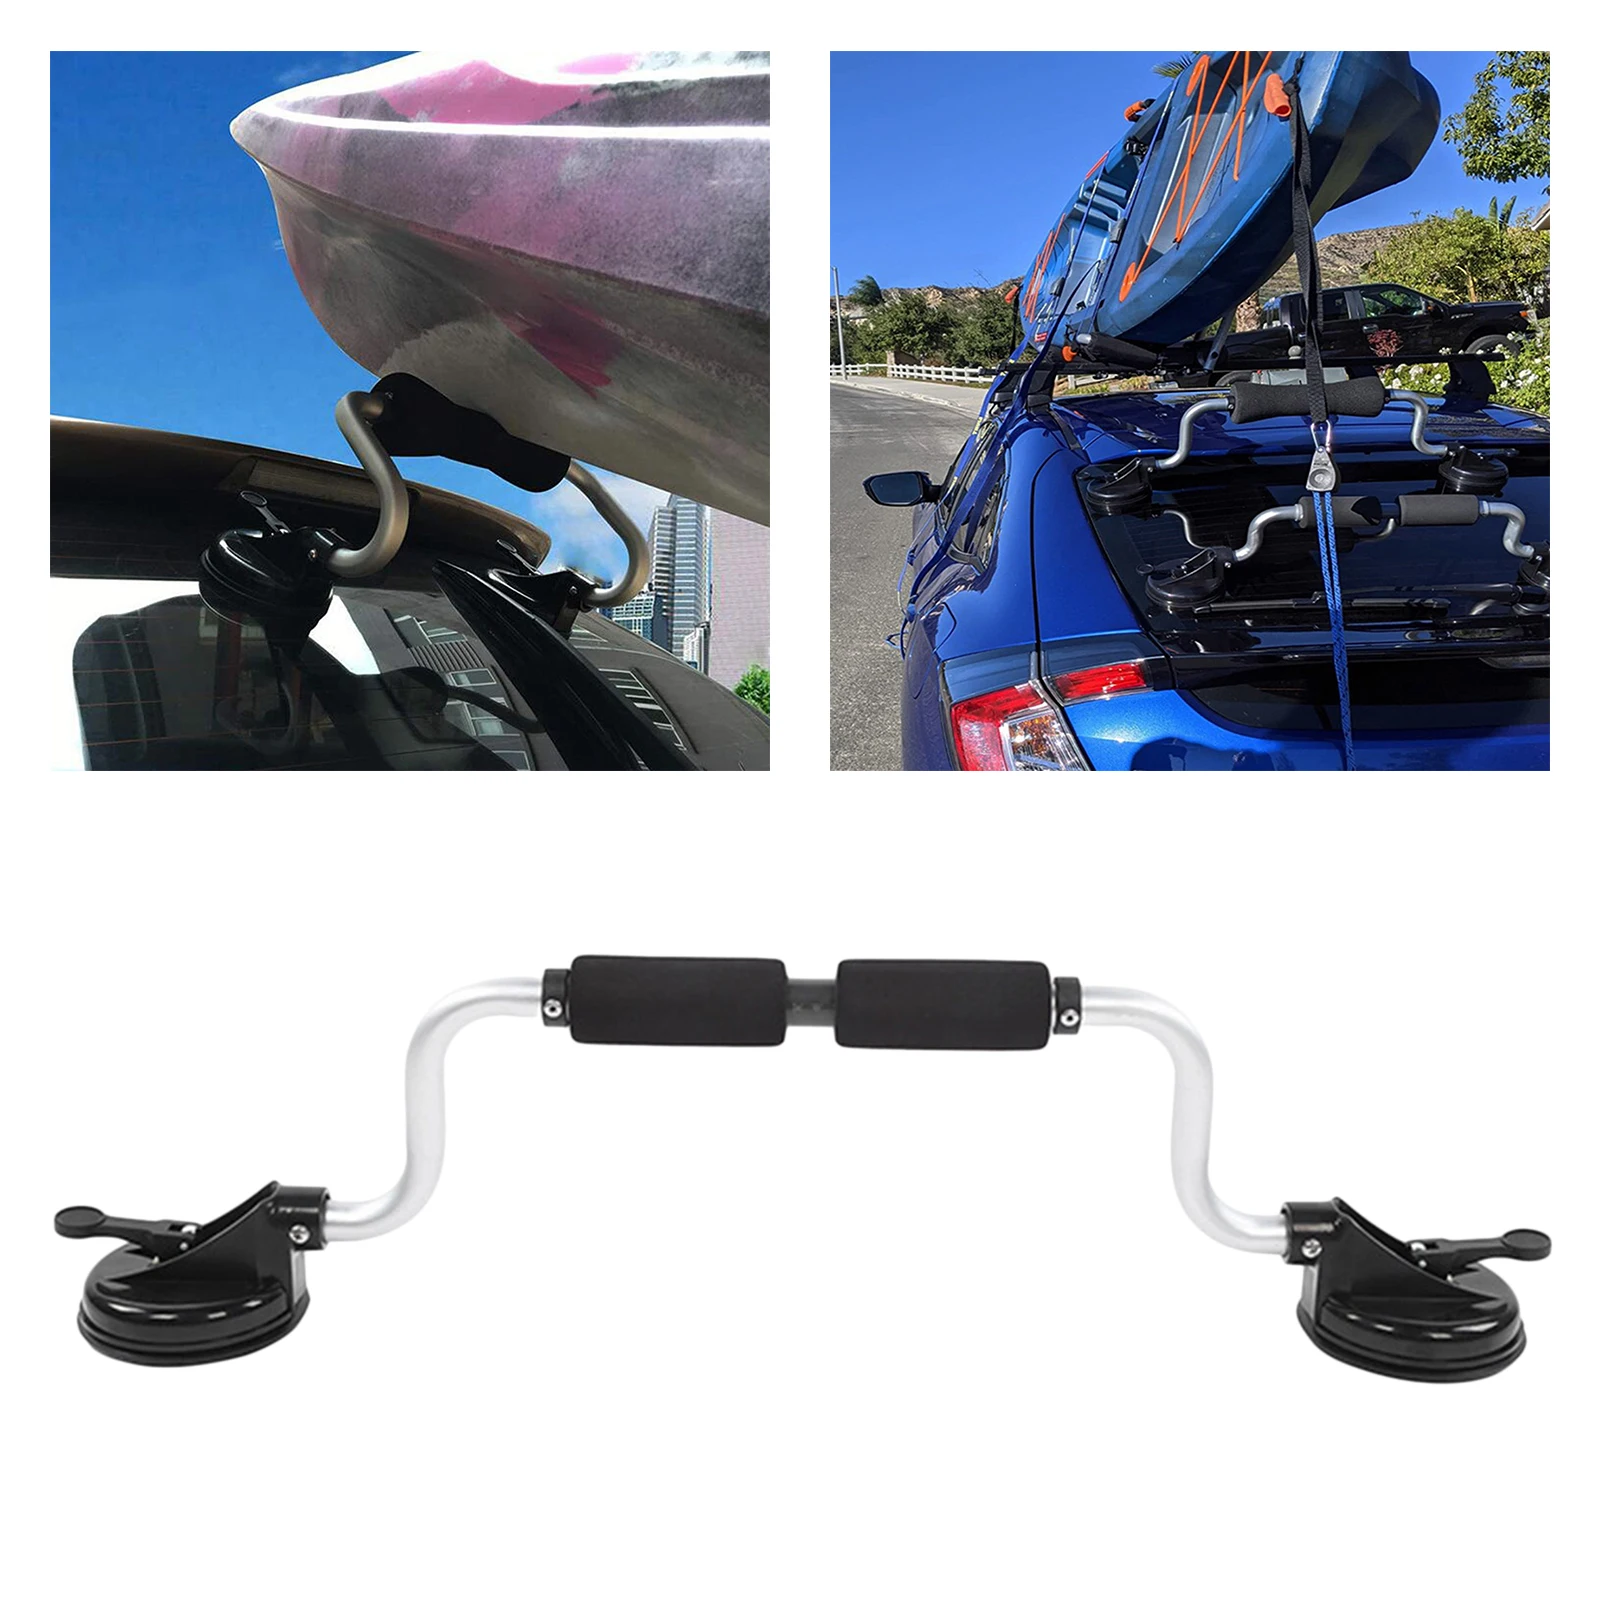 Boat Pusher Suction Cup Holder, Suction Boat Roller Load Assist For Mounting Kayaks And Canoes To Car Tops